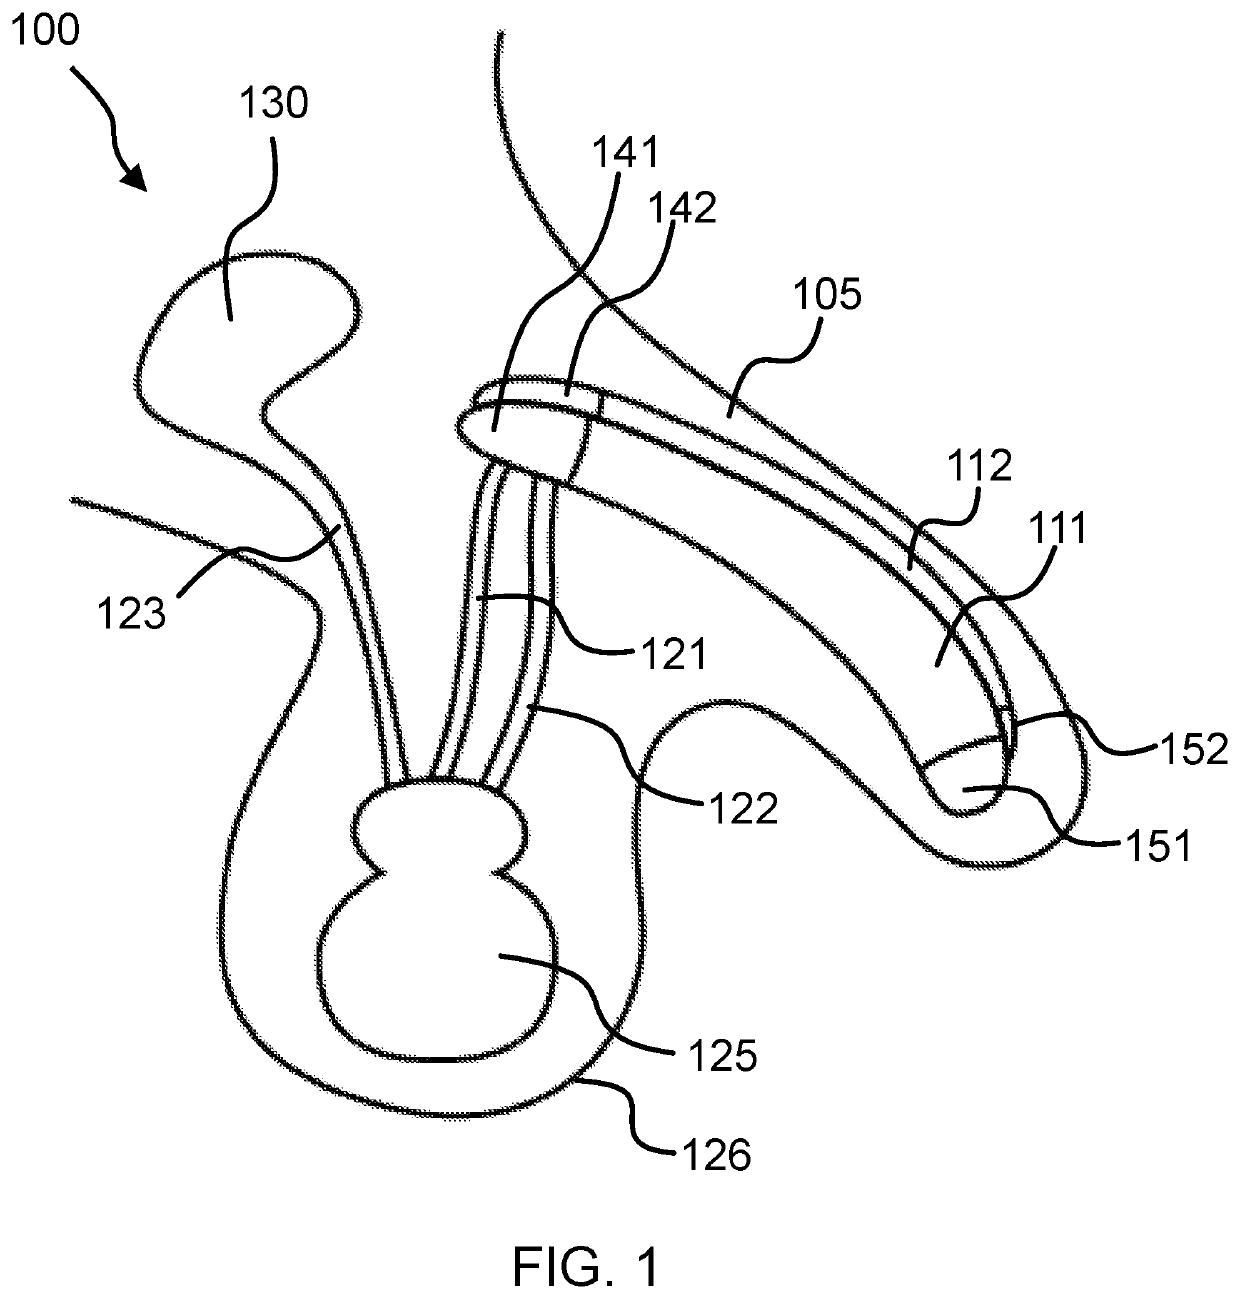 Penile prosthesis comprising a reservoir attachable to a pump by connectors